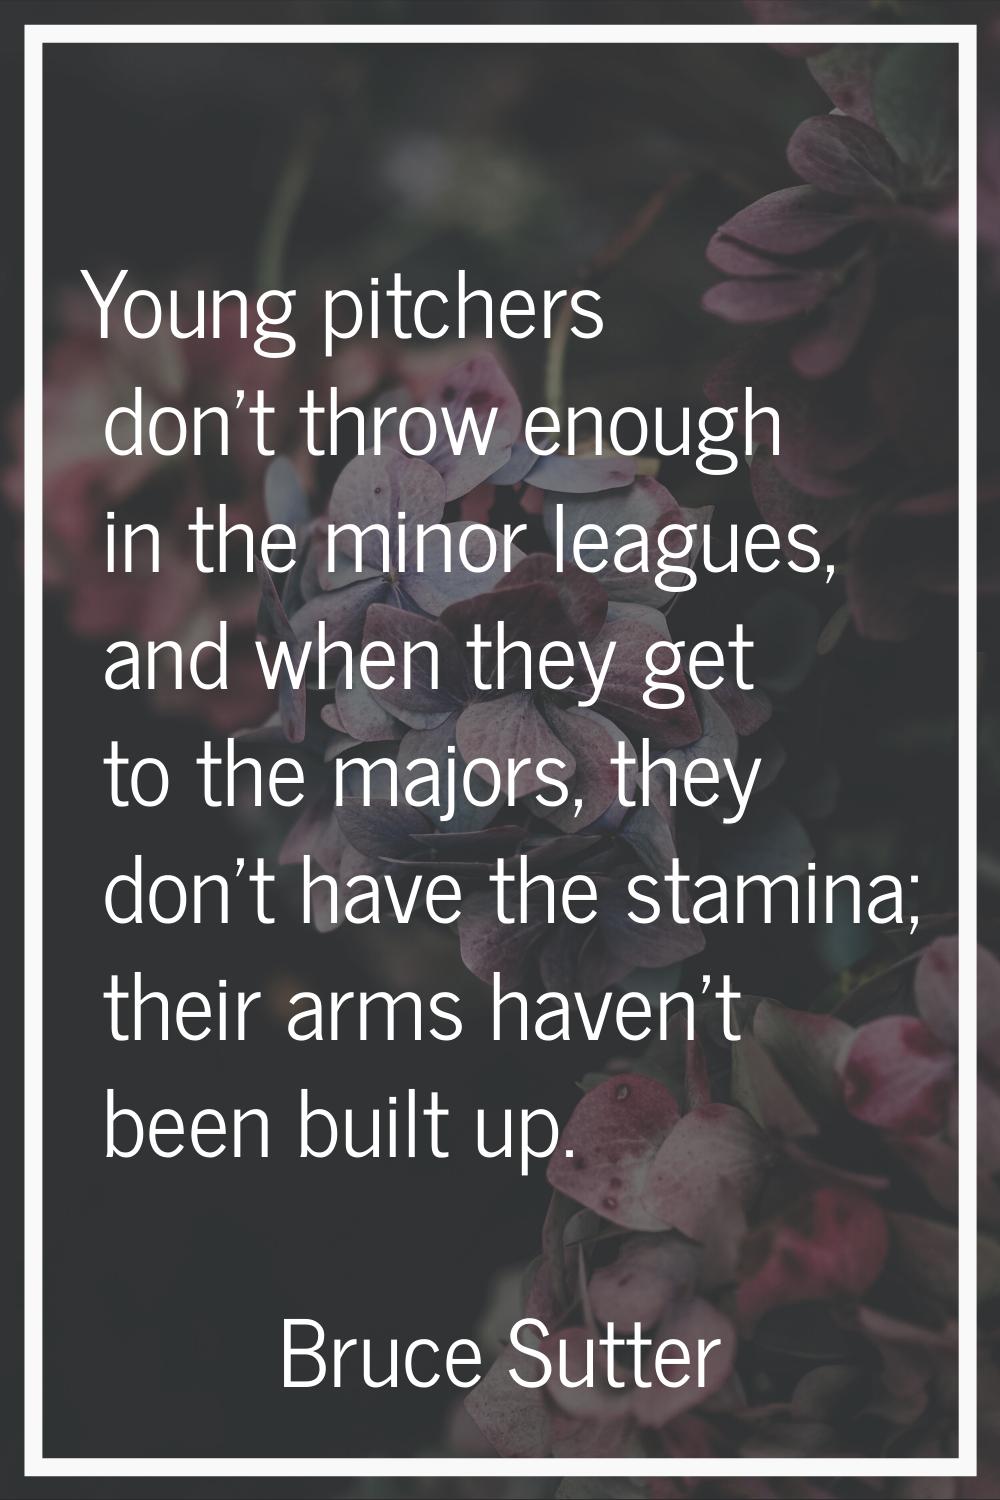 Young pitchers don't throw enough in the minor leagues, and when they get to the majors, they don't